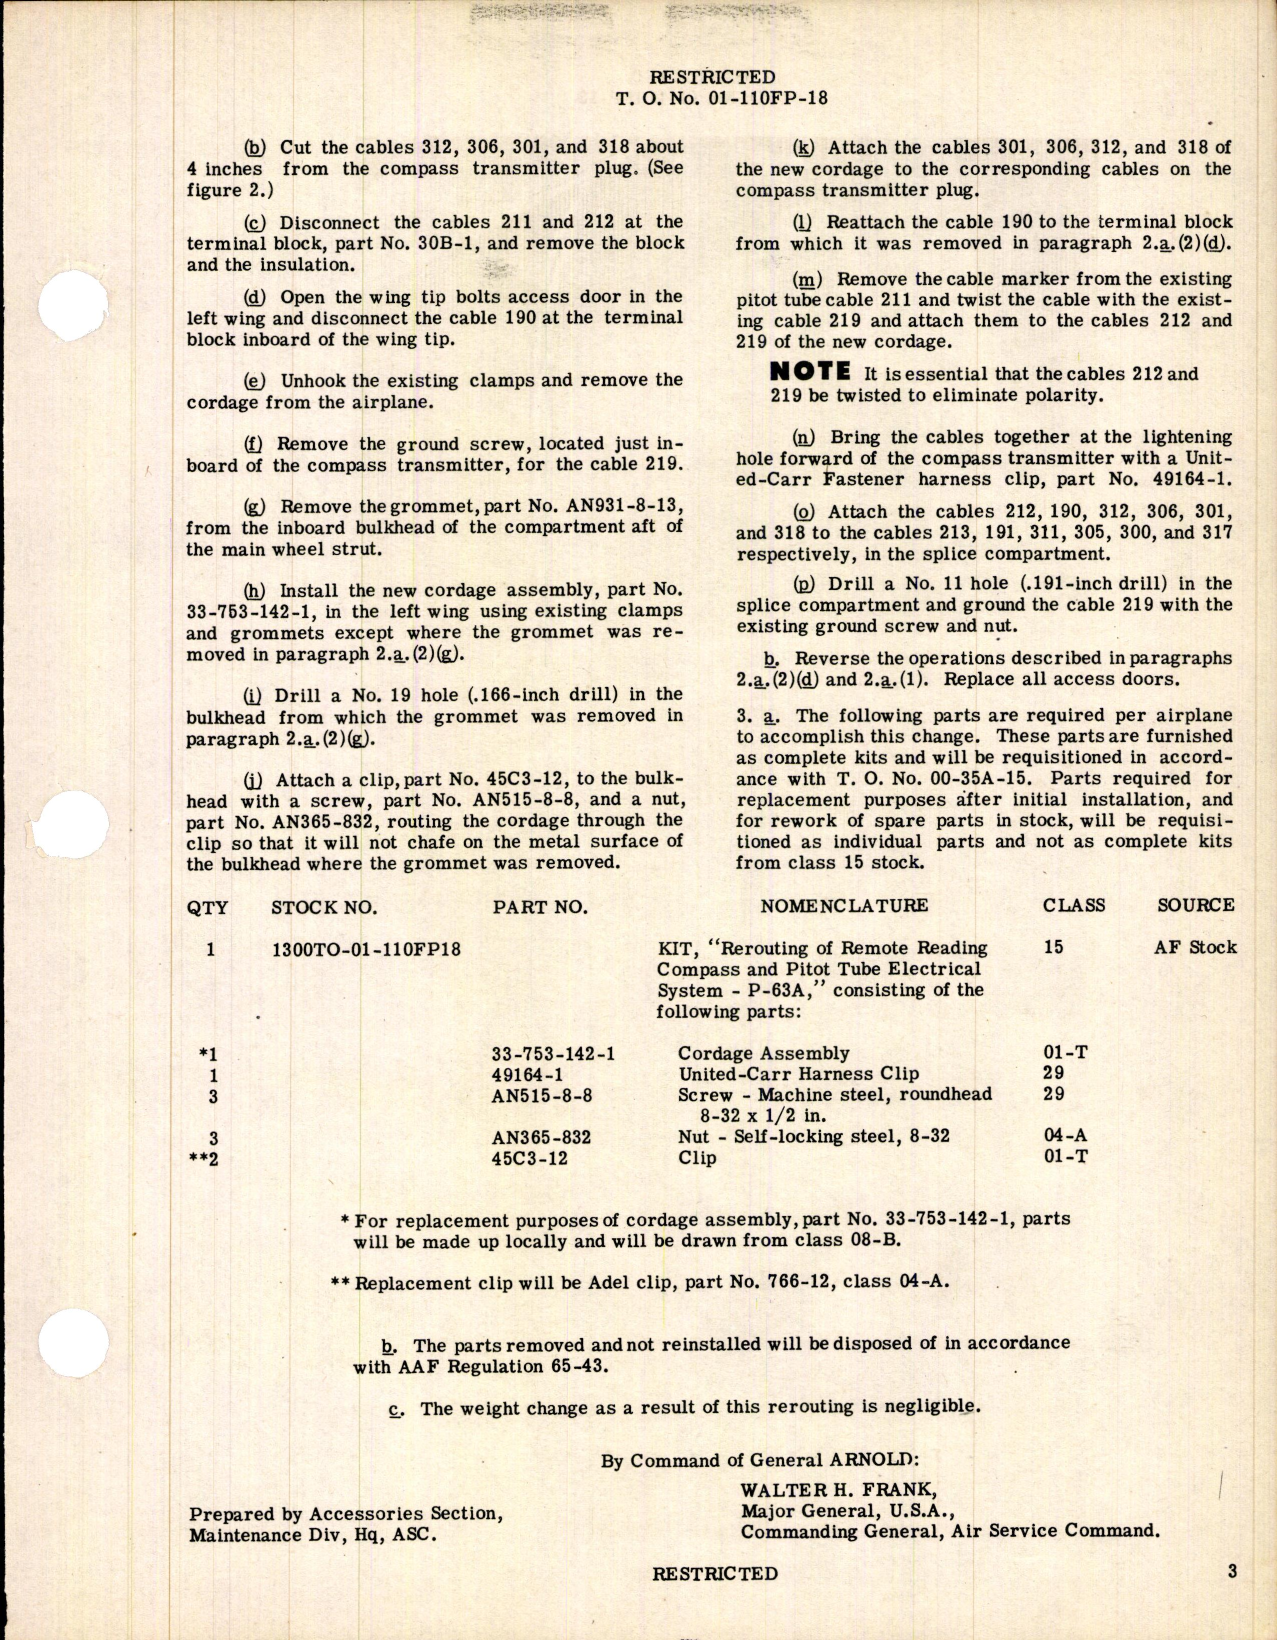 Sample page 3 from AirCorps Library document: Rerouting of Remote Reading Compass & Pitot Tube 